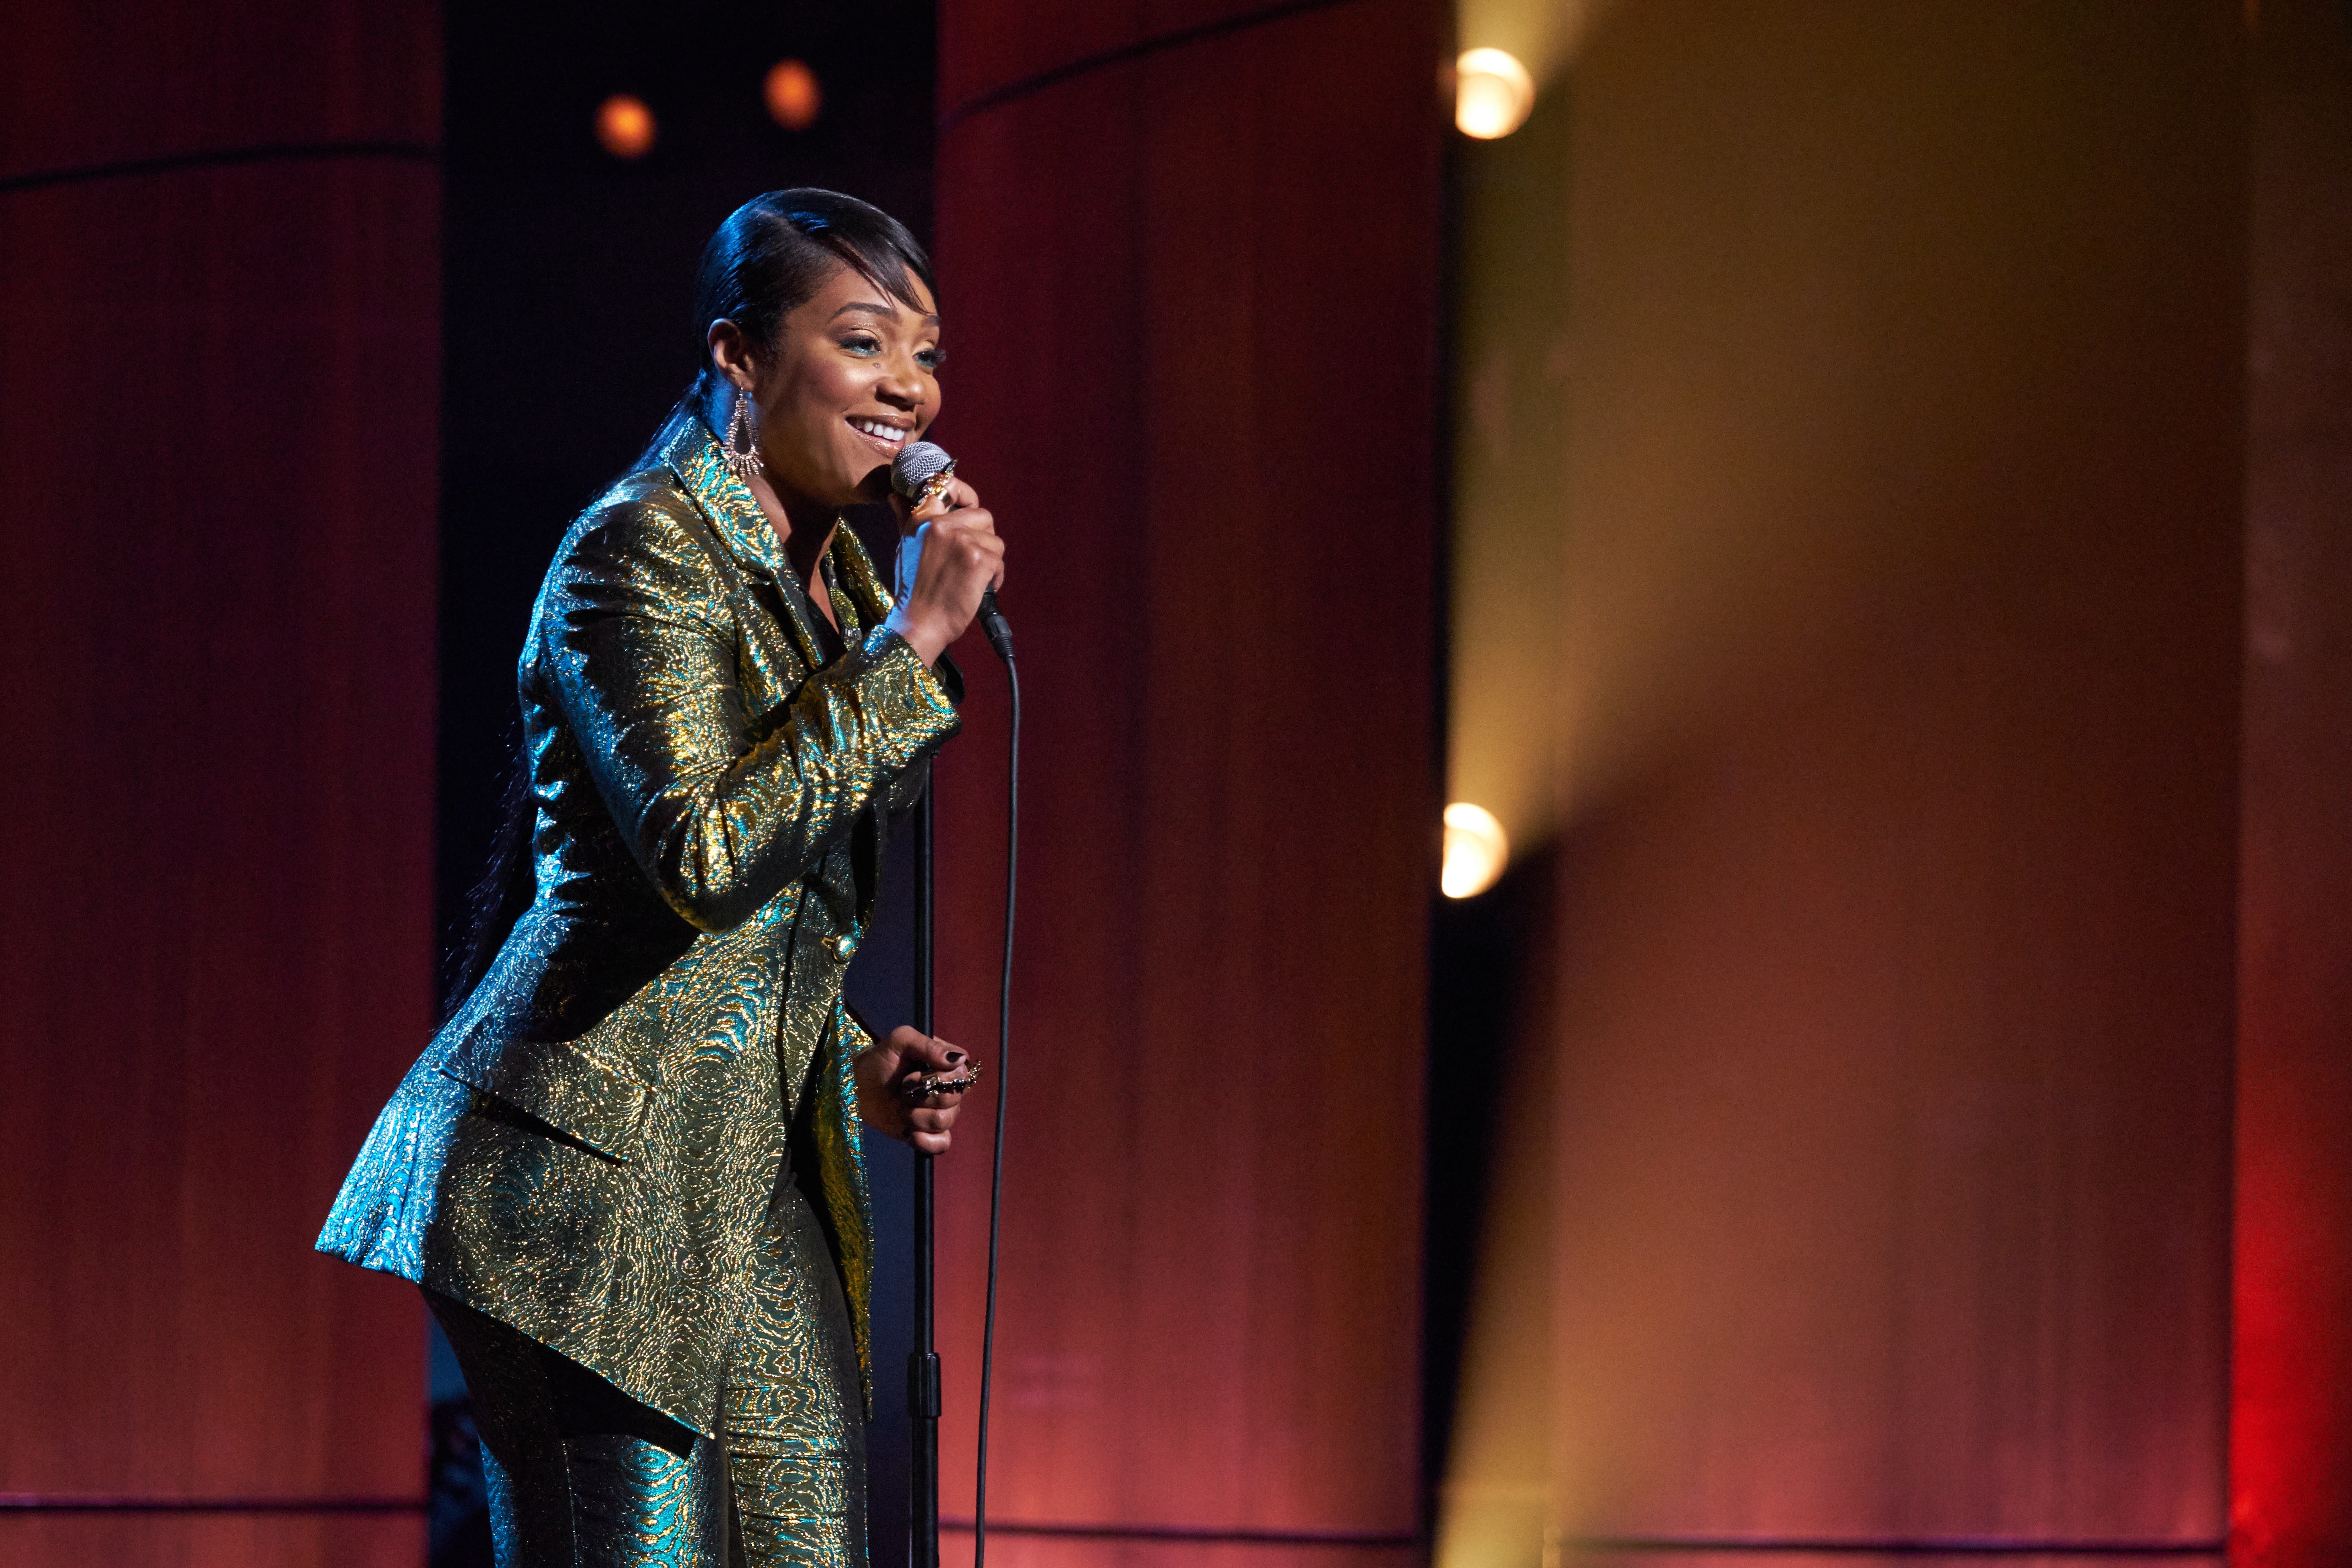 The Best Female StandUp Comedian Specials to Watch Right Now